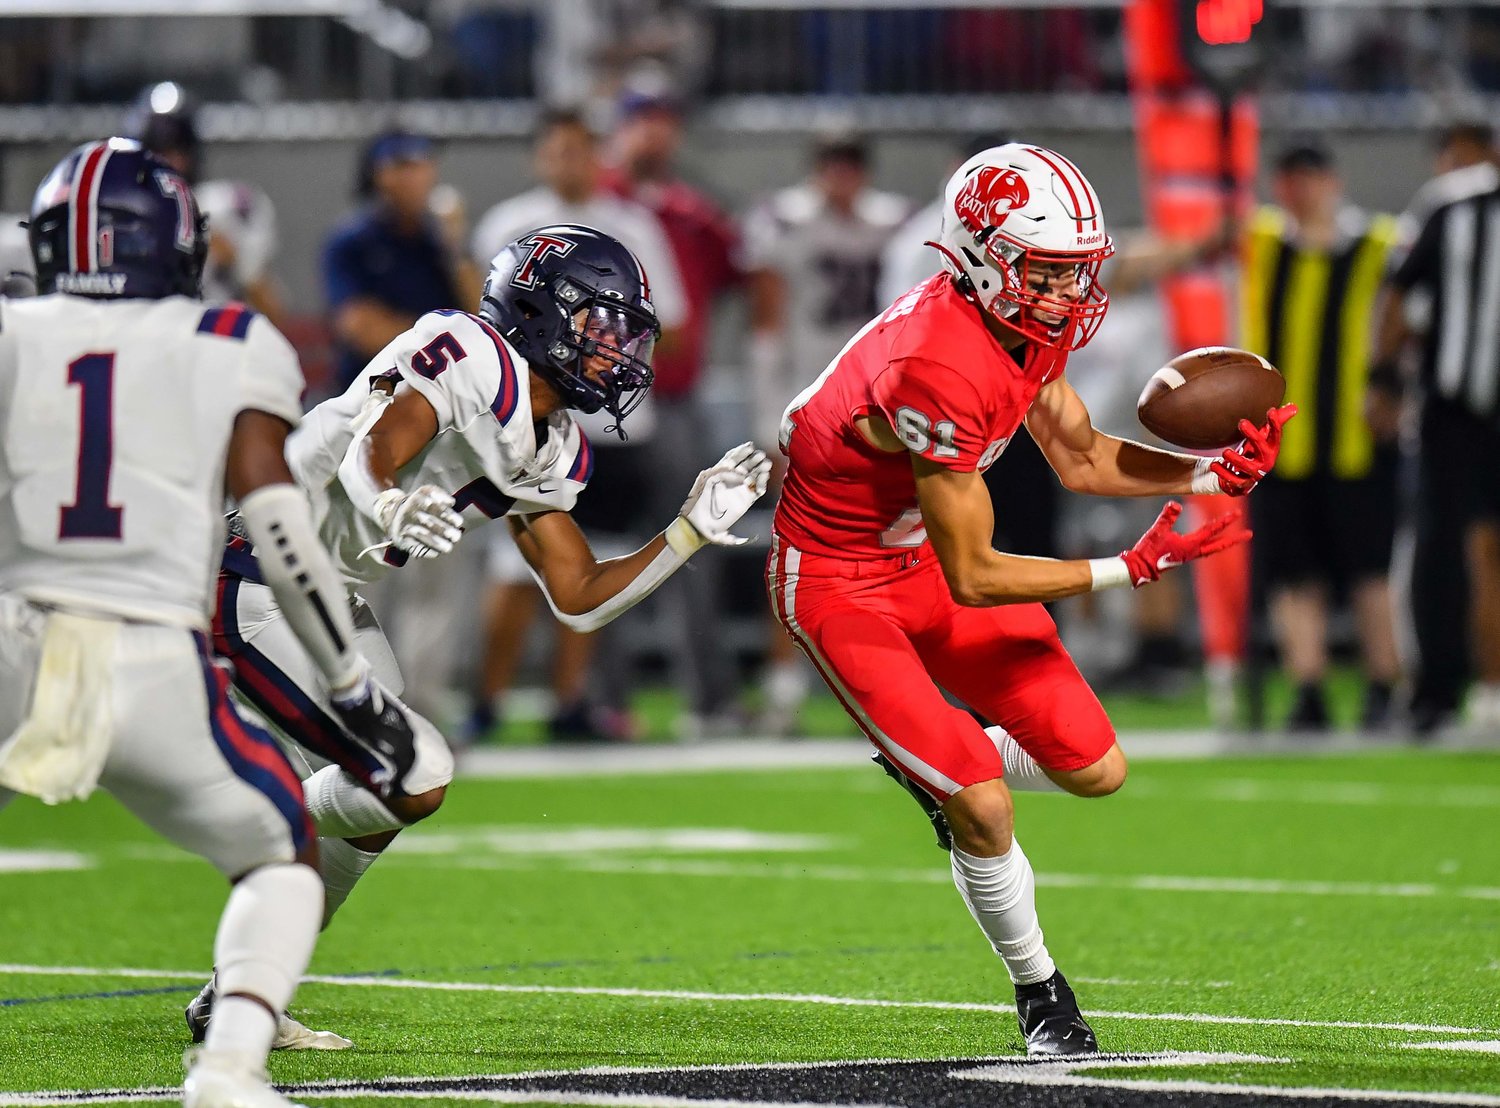 Katy, Tx. Oct 1, 2021:  Katy's #81 Jr Ceyanes makes a reception during a conference game between Katy Tigers and Tompkins Falcons at Legacy Stadium. (Photo by Mark Goodman / Katy Times)